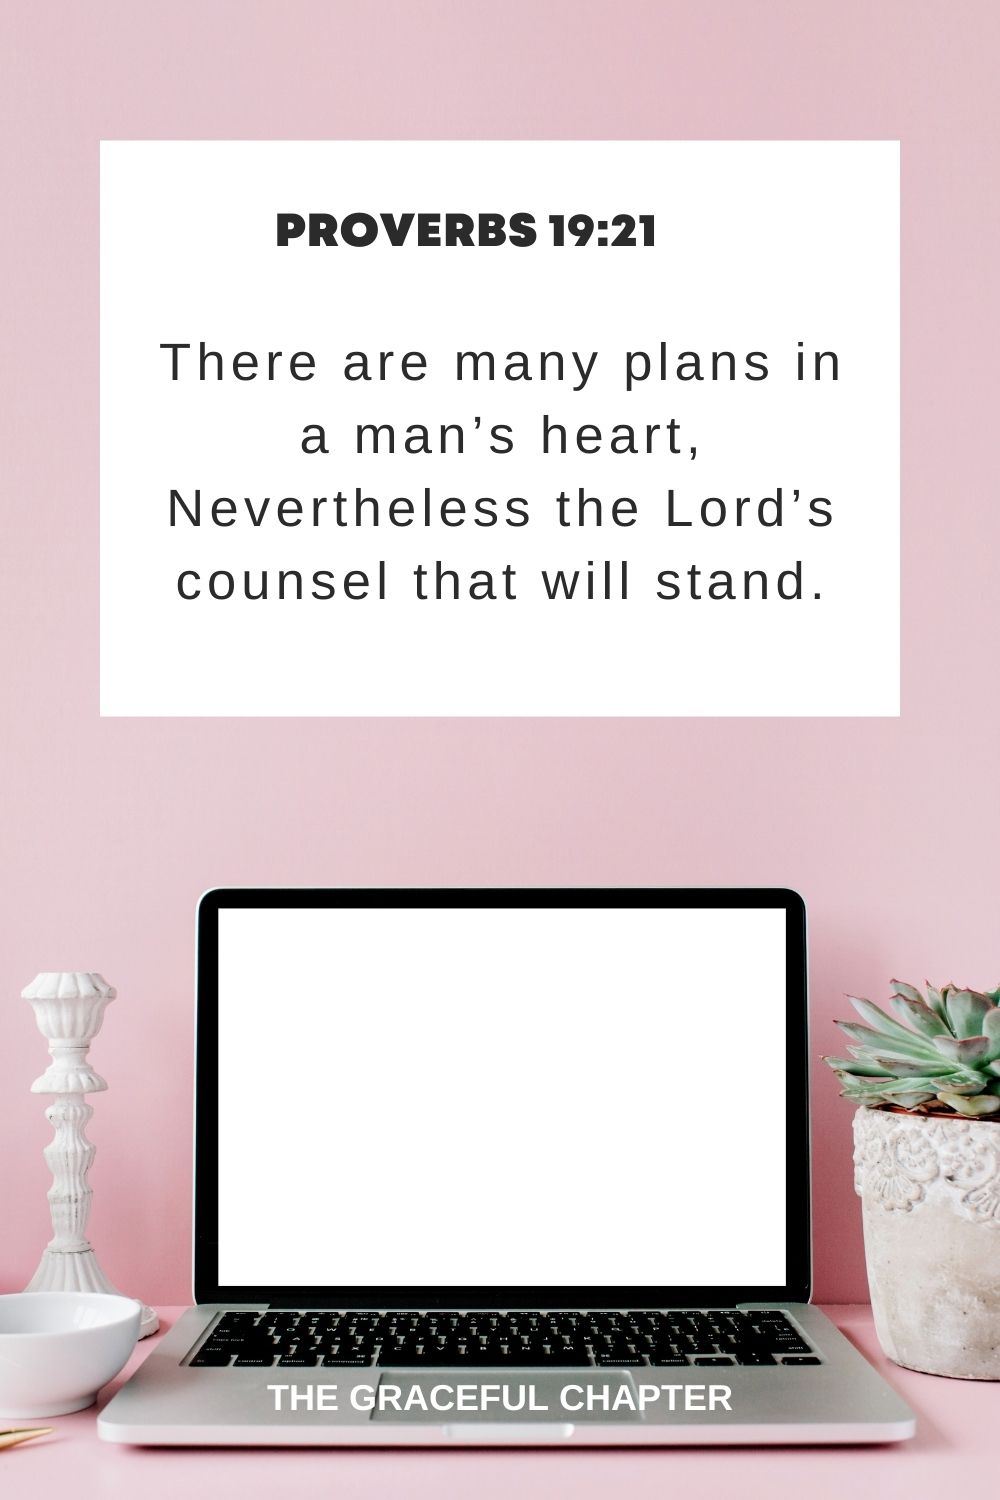 There are many plans in a man’s heart, Nevertheless the Lord’s counsel that will stand. Proverbs 19:21